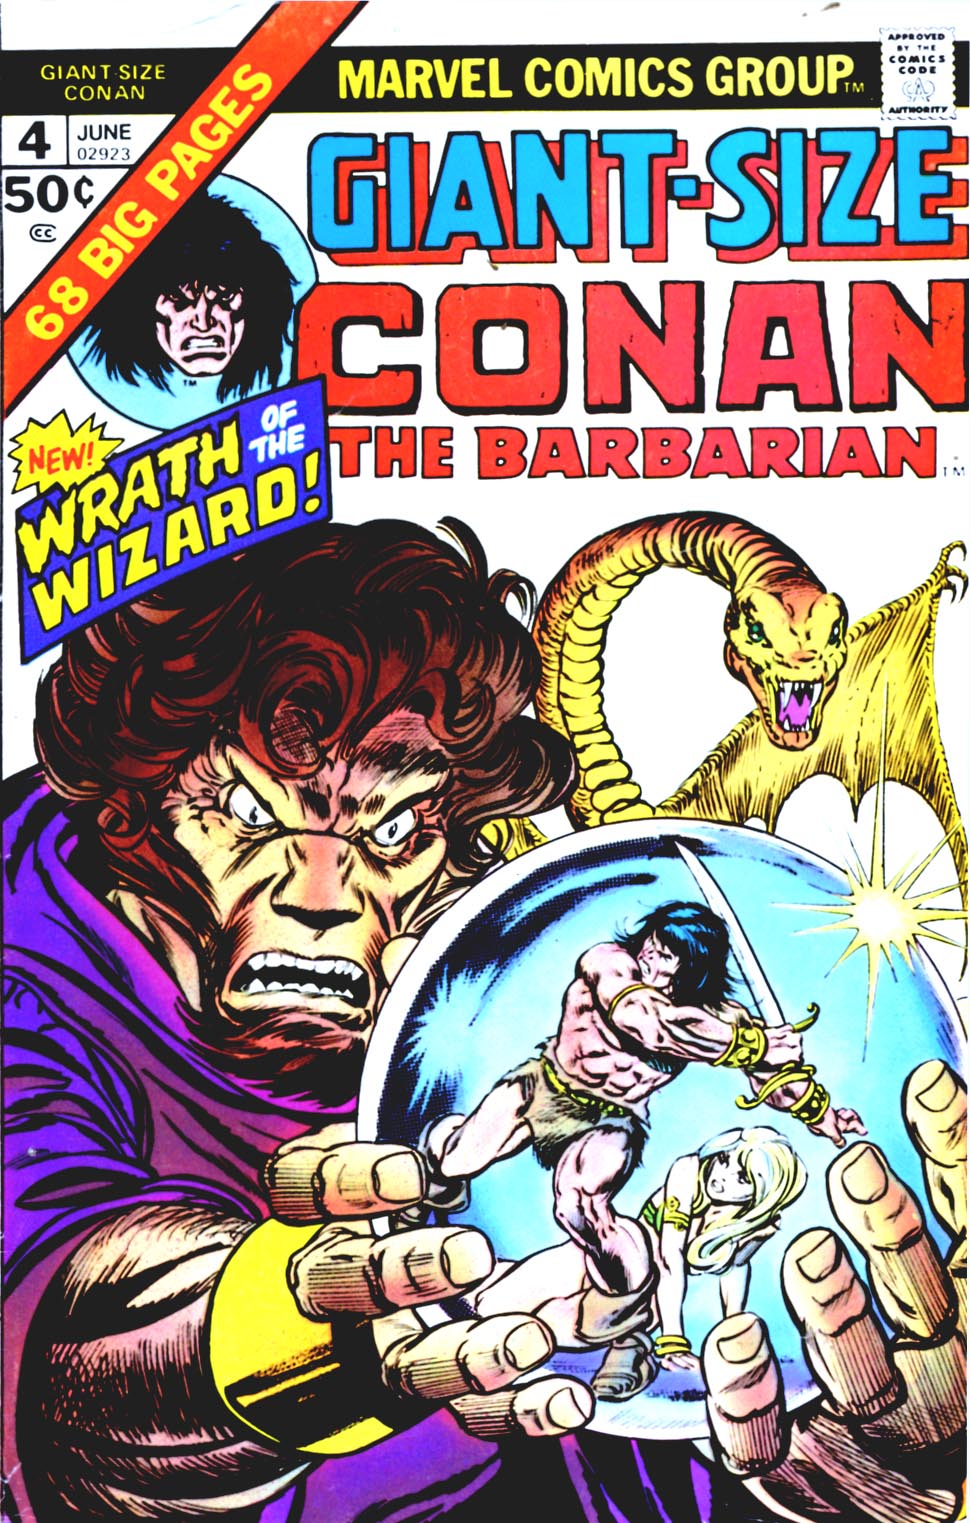 Read online Giant-Size Conan comic -  Issue #4 - 1